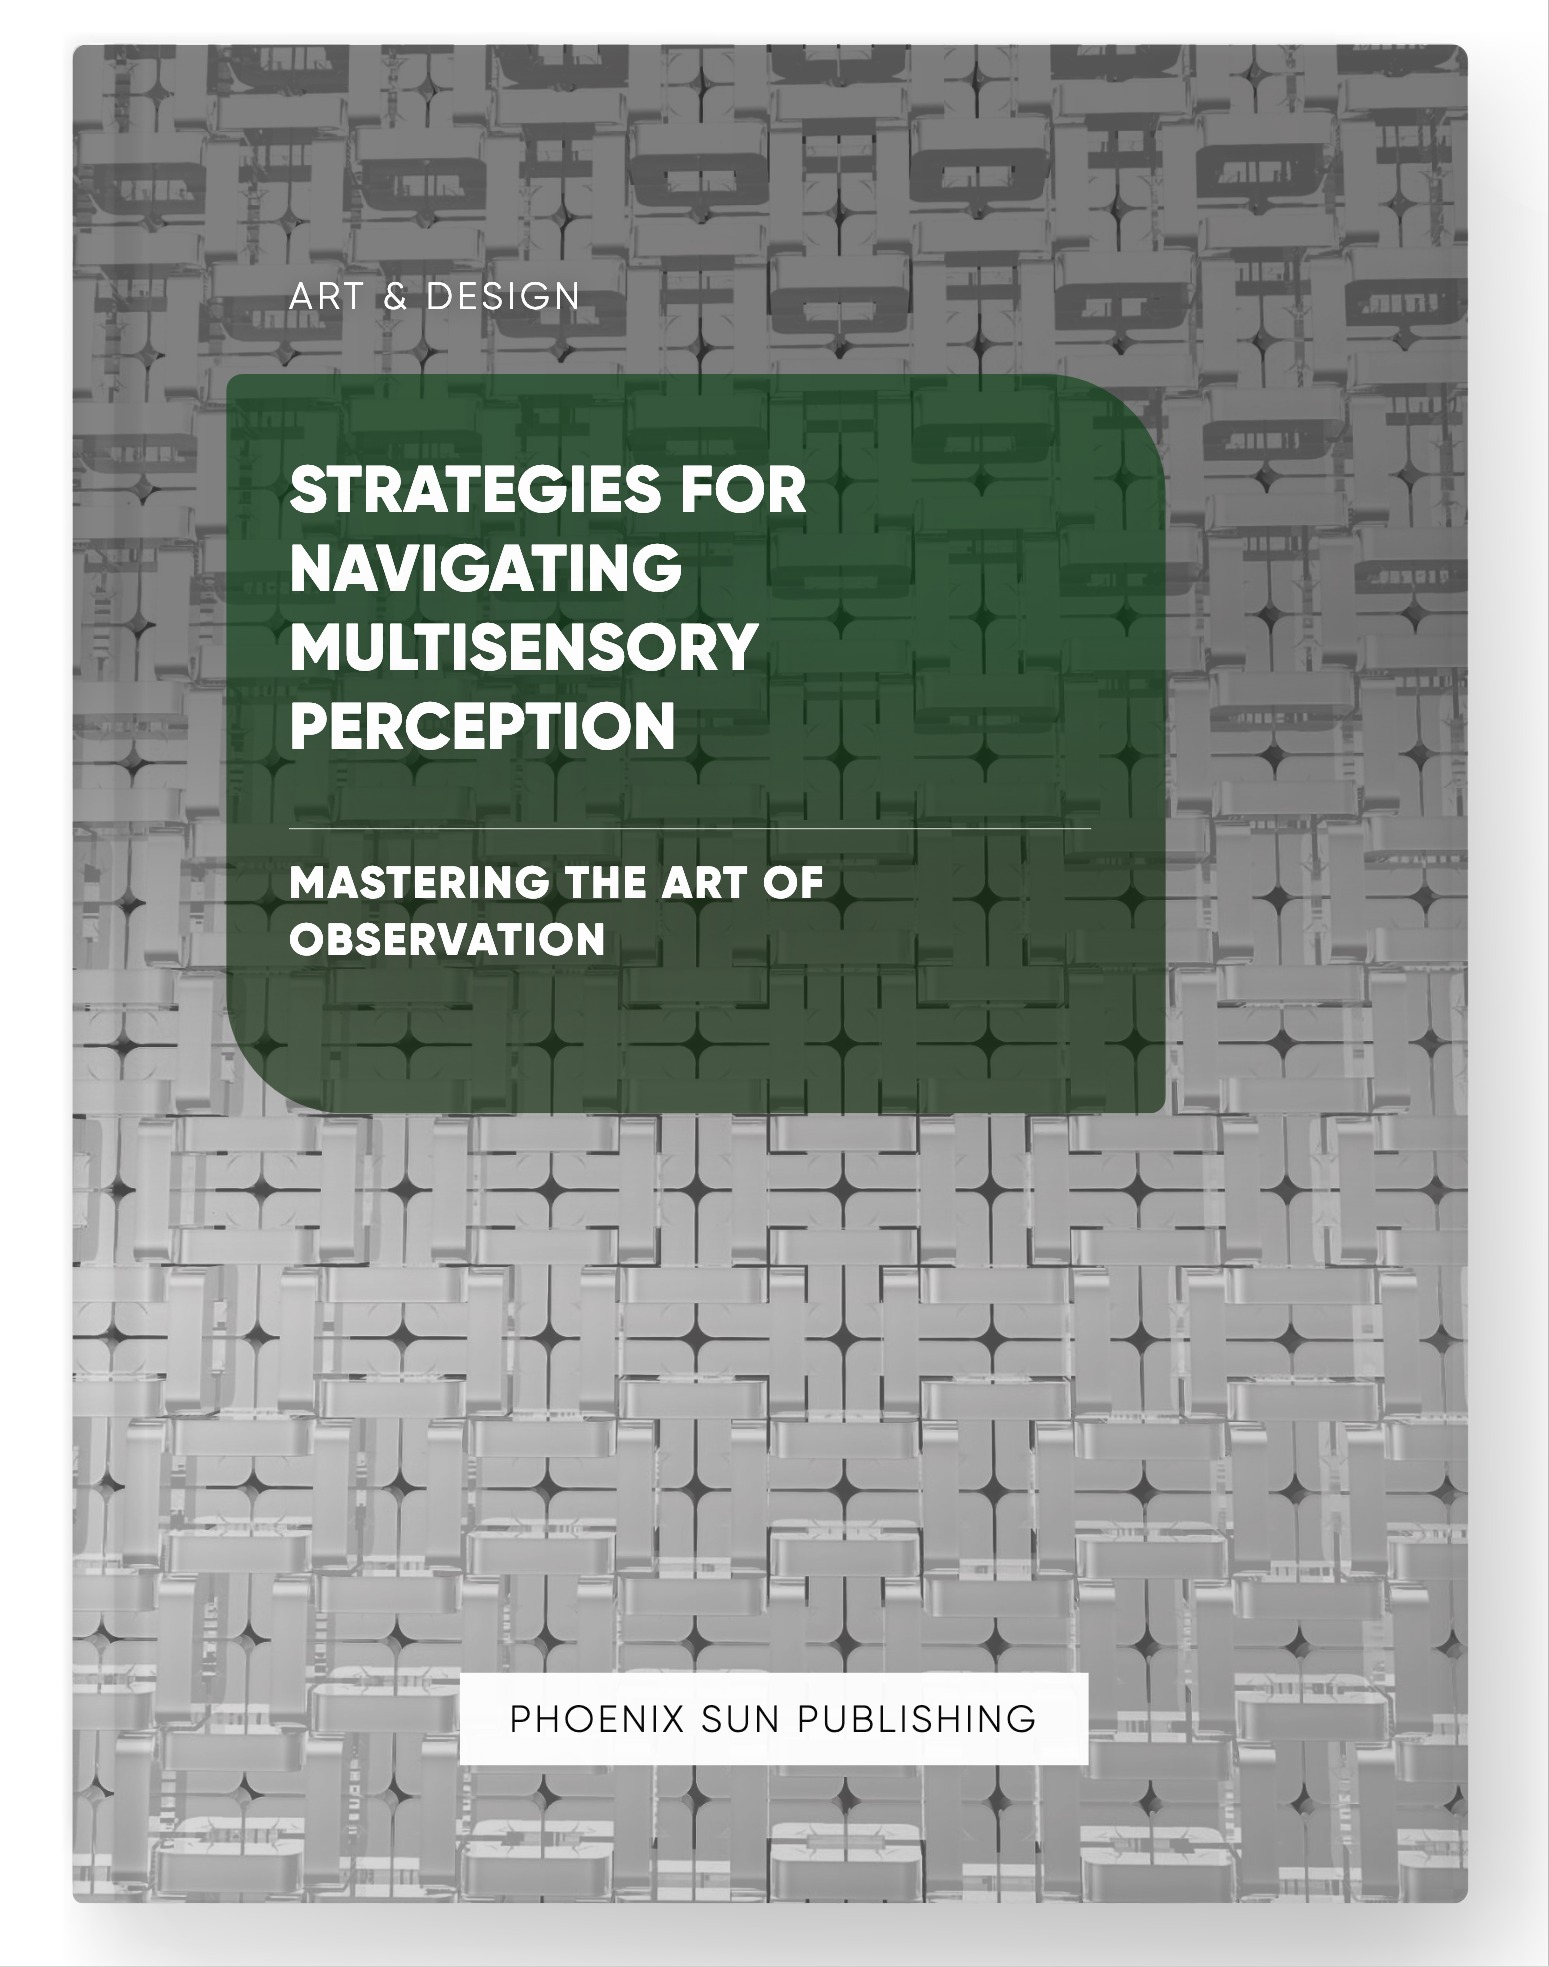 Strategies for Navigating Multisensory Perception – Mastering the Art of Observation